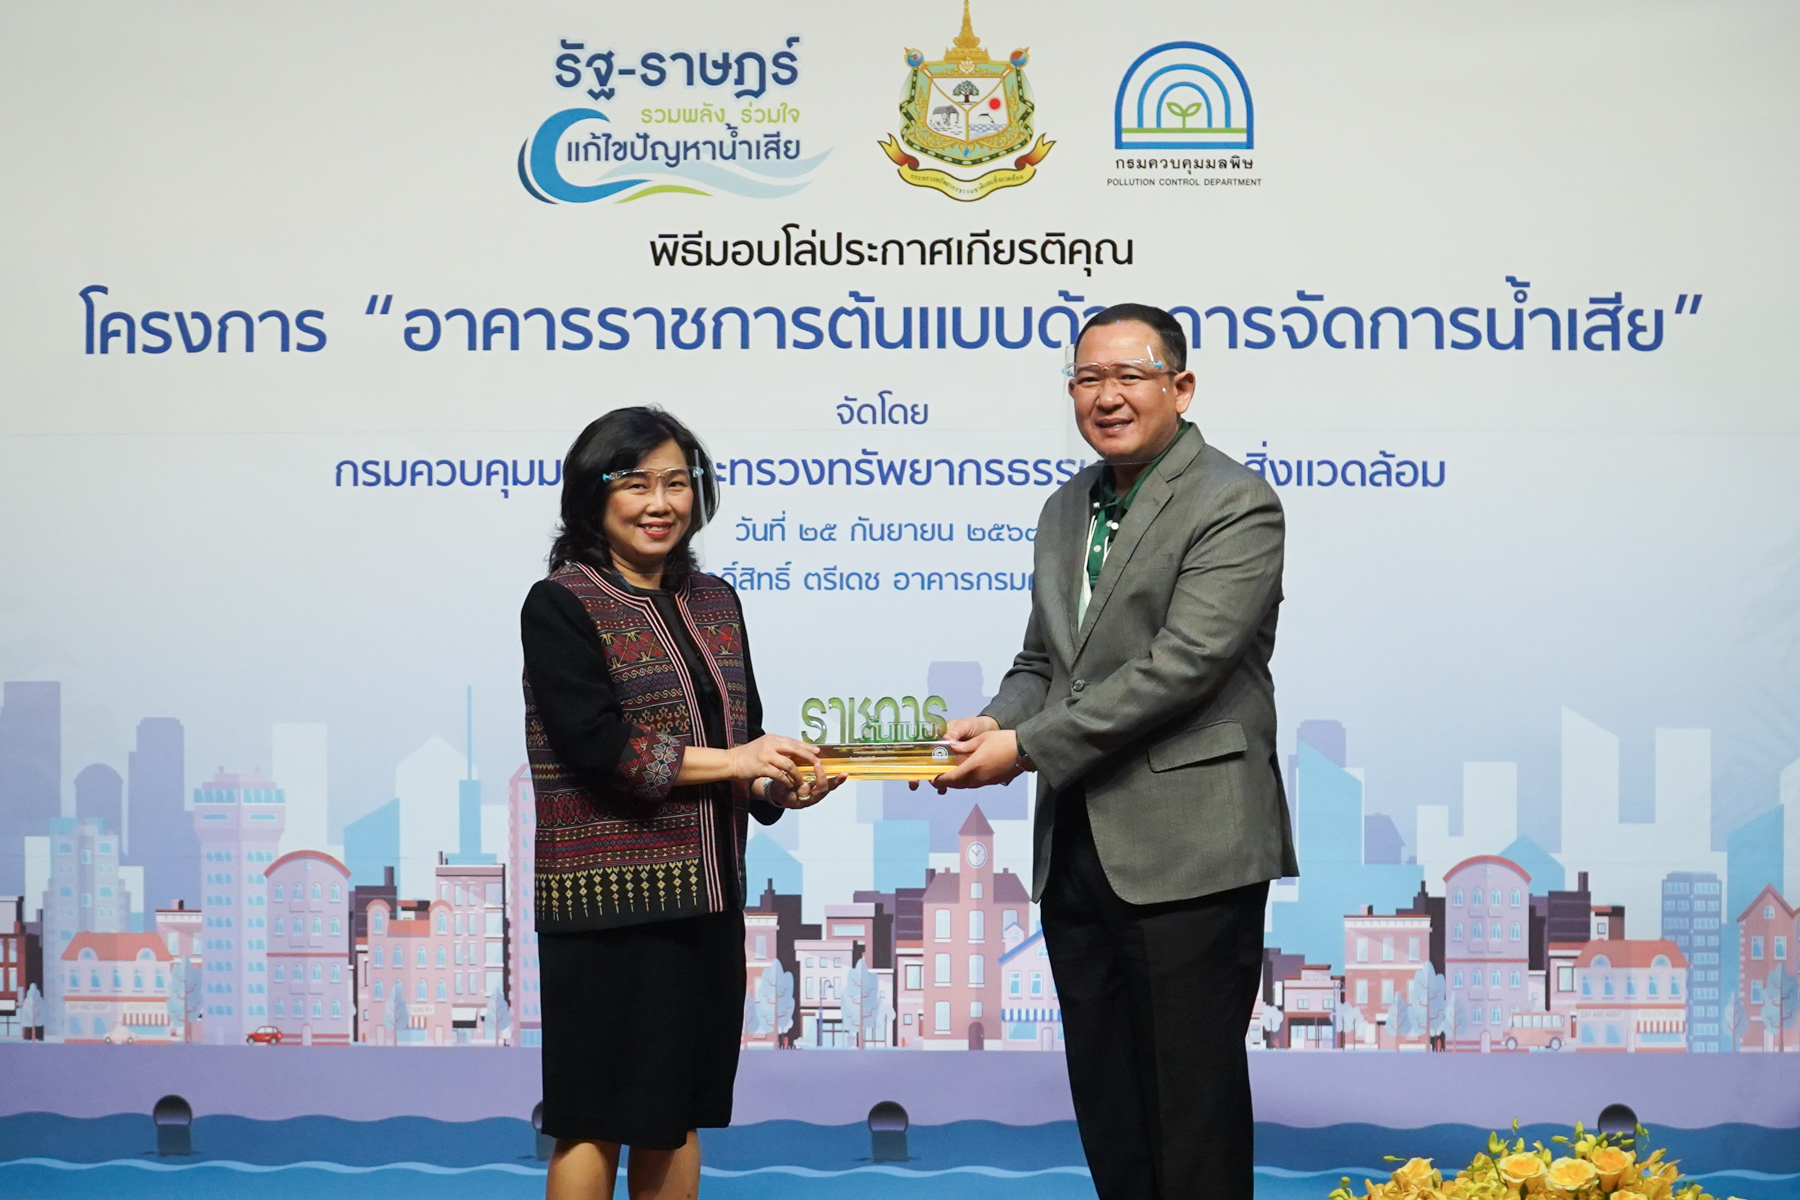 EXIM Thailand Received a Gold Level Award of  “Wastewater Management Excellence for Government Office Buildings”